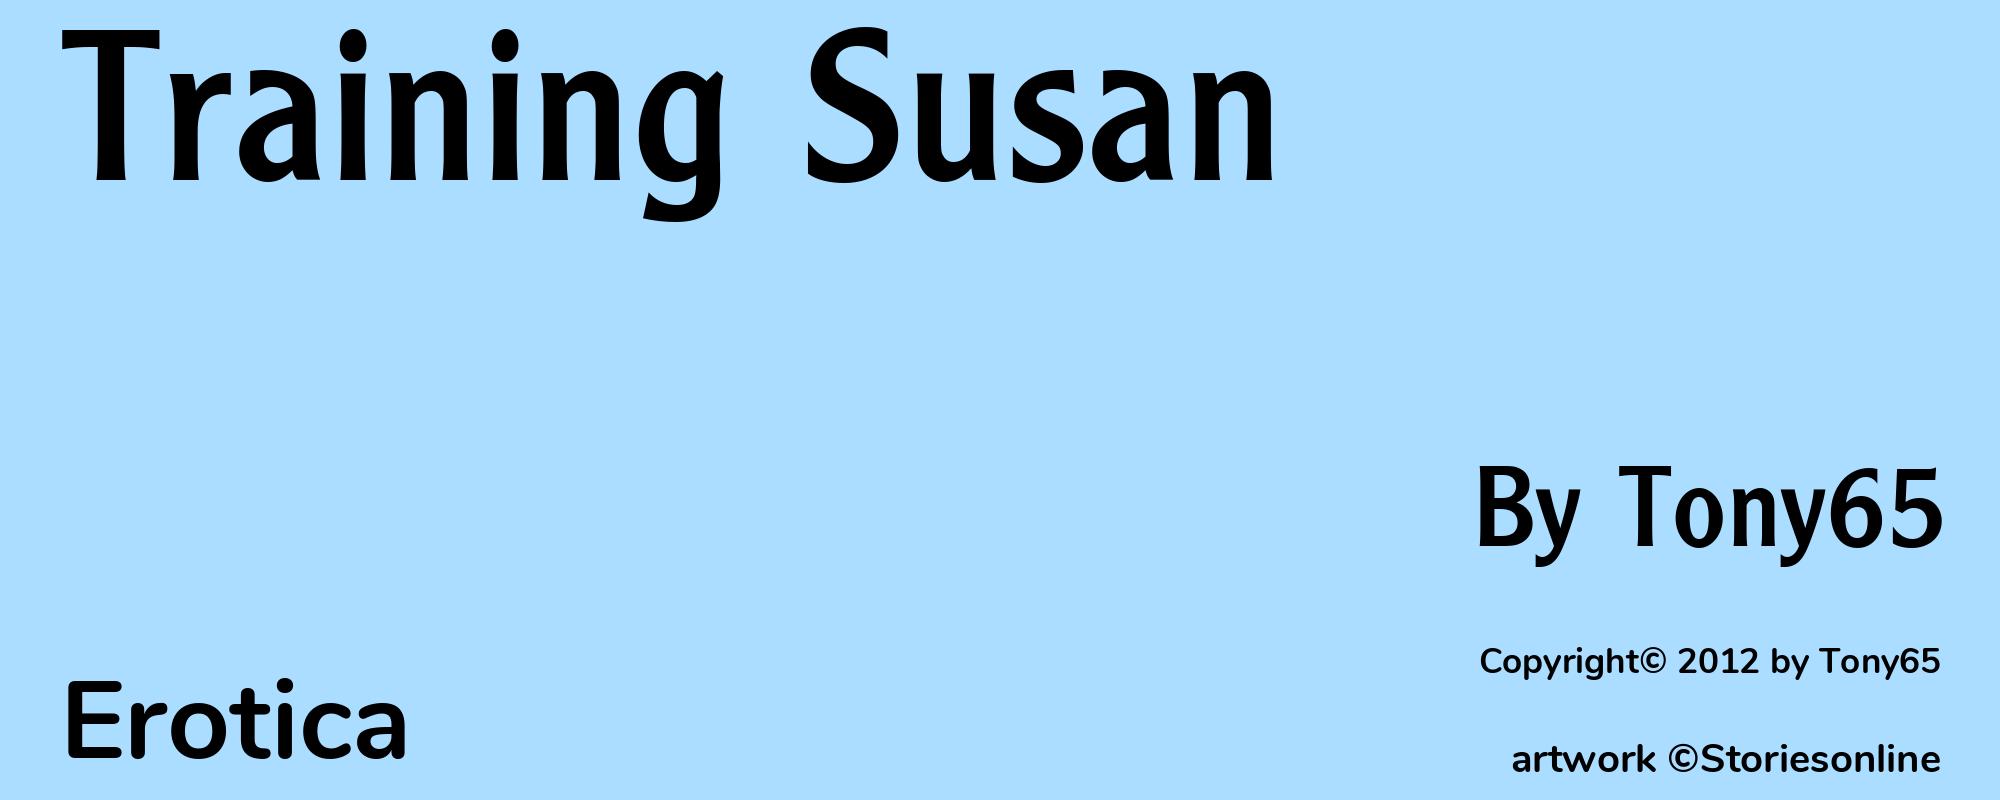 Training Susan - Cover